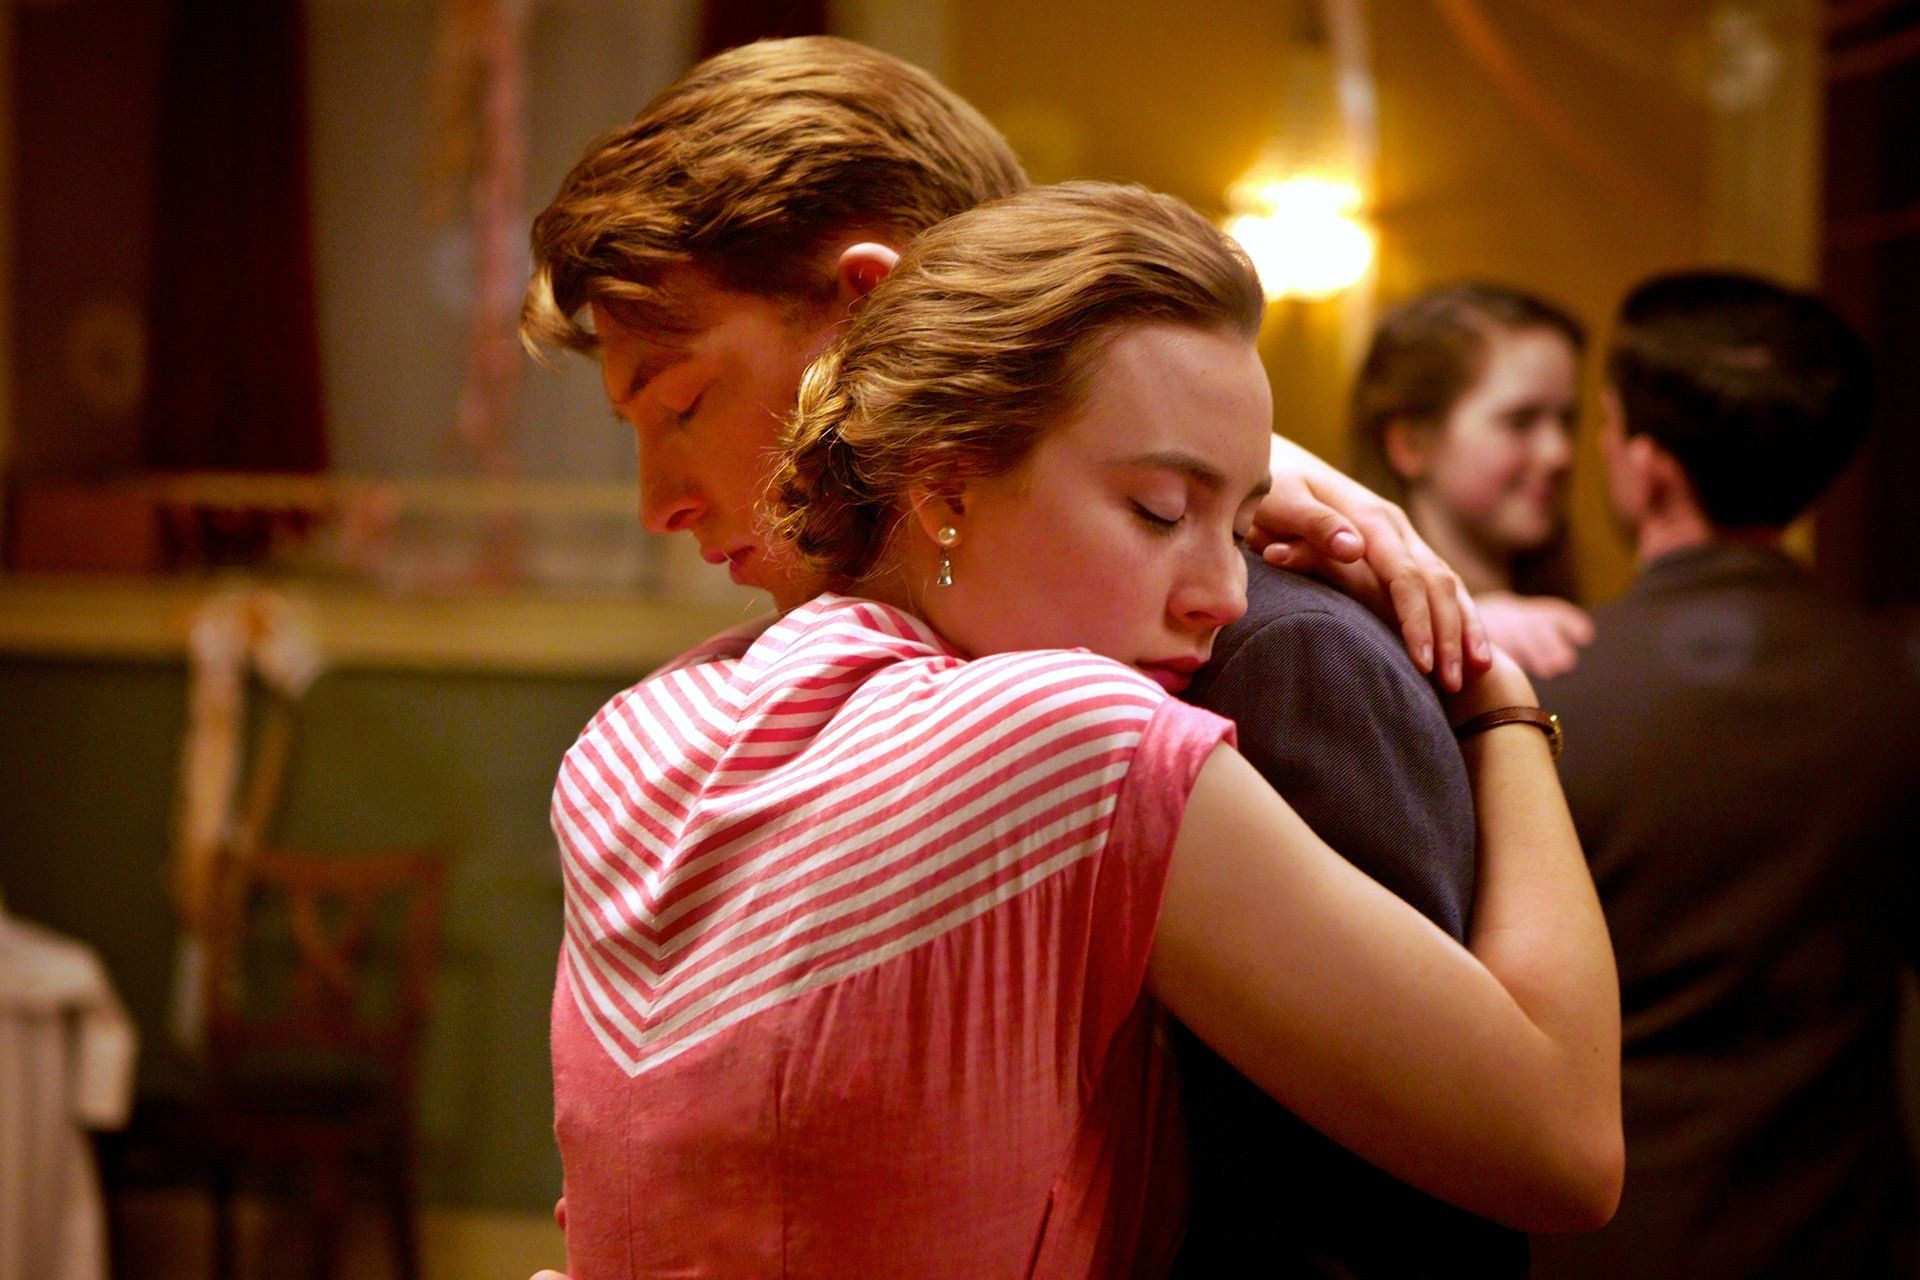 Brooklyn' (2015) Paints a Powerfully Nostalgic Portrait of Love, Loss, and Home